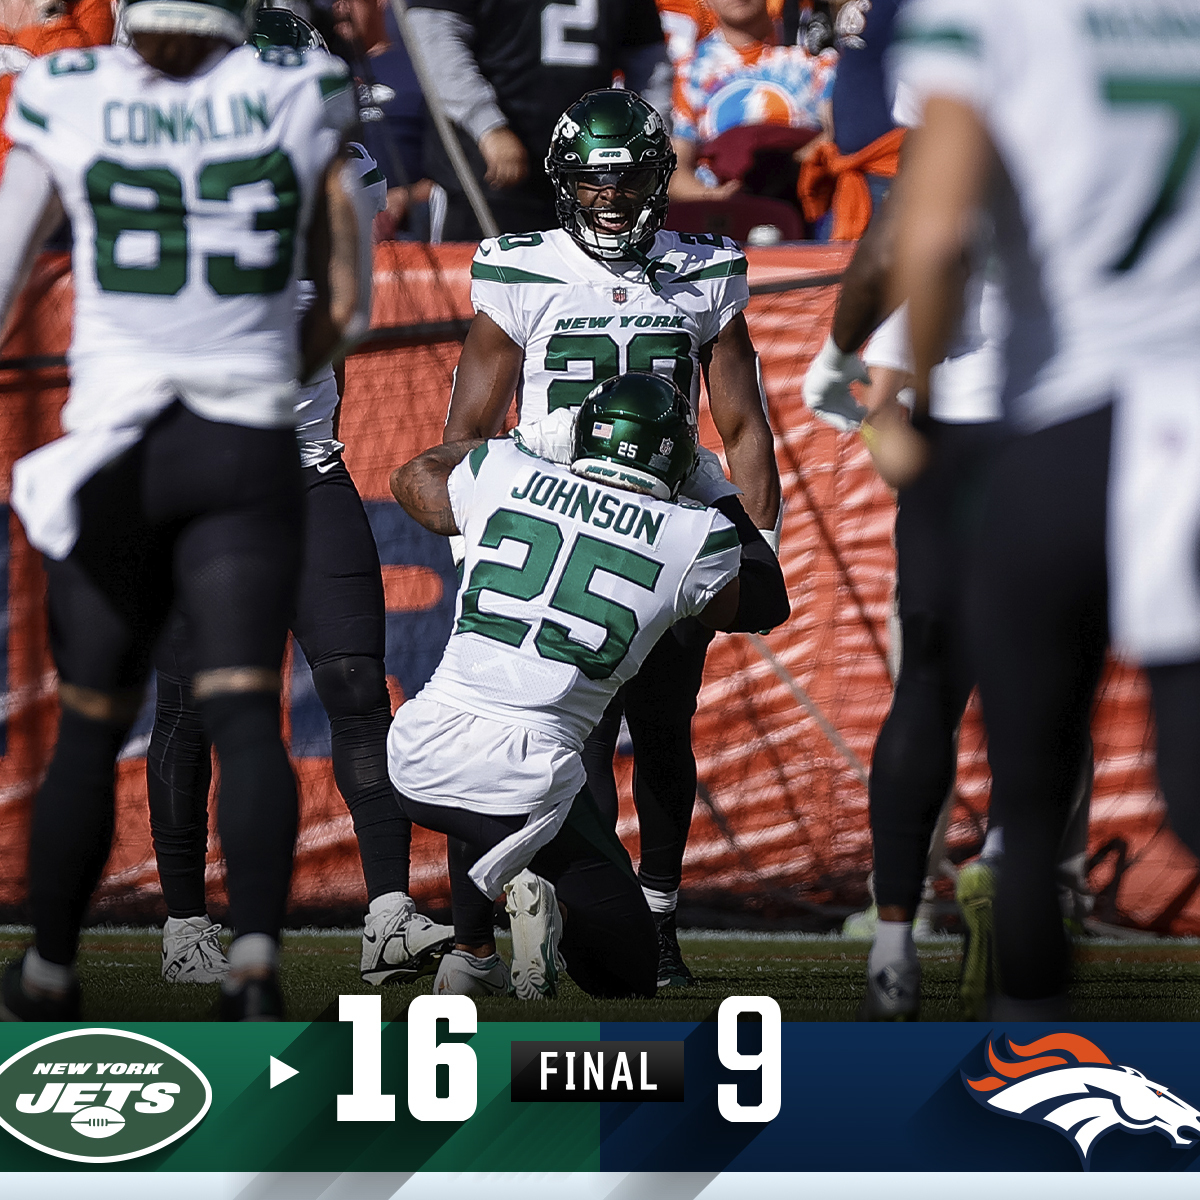 FINAL: Four straight wins for the @nyjets! #NYJvsDEN